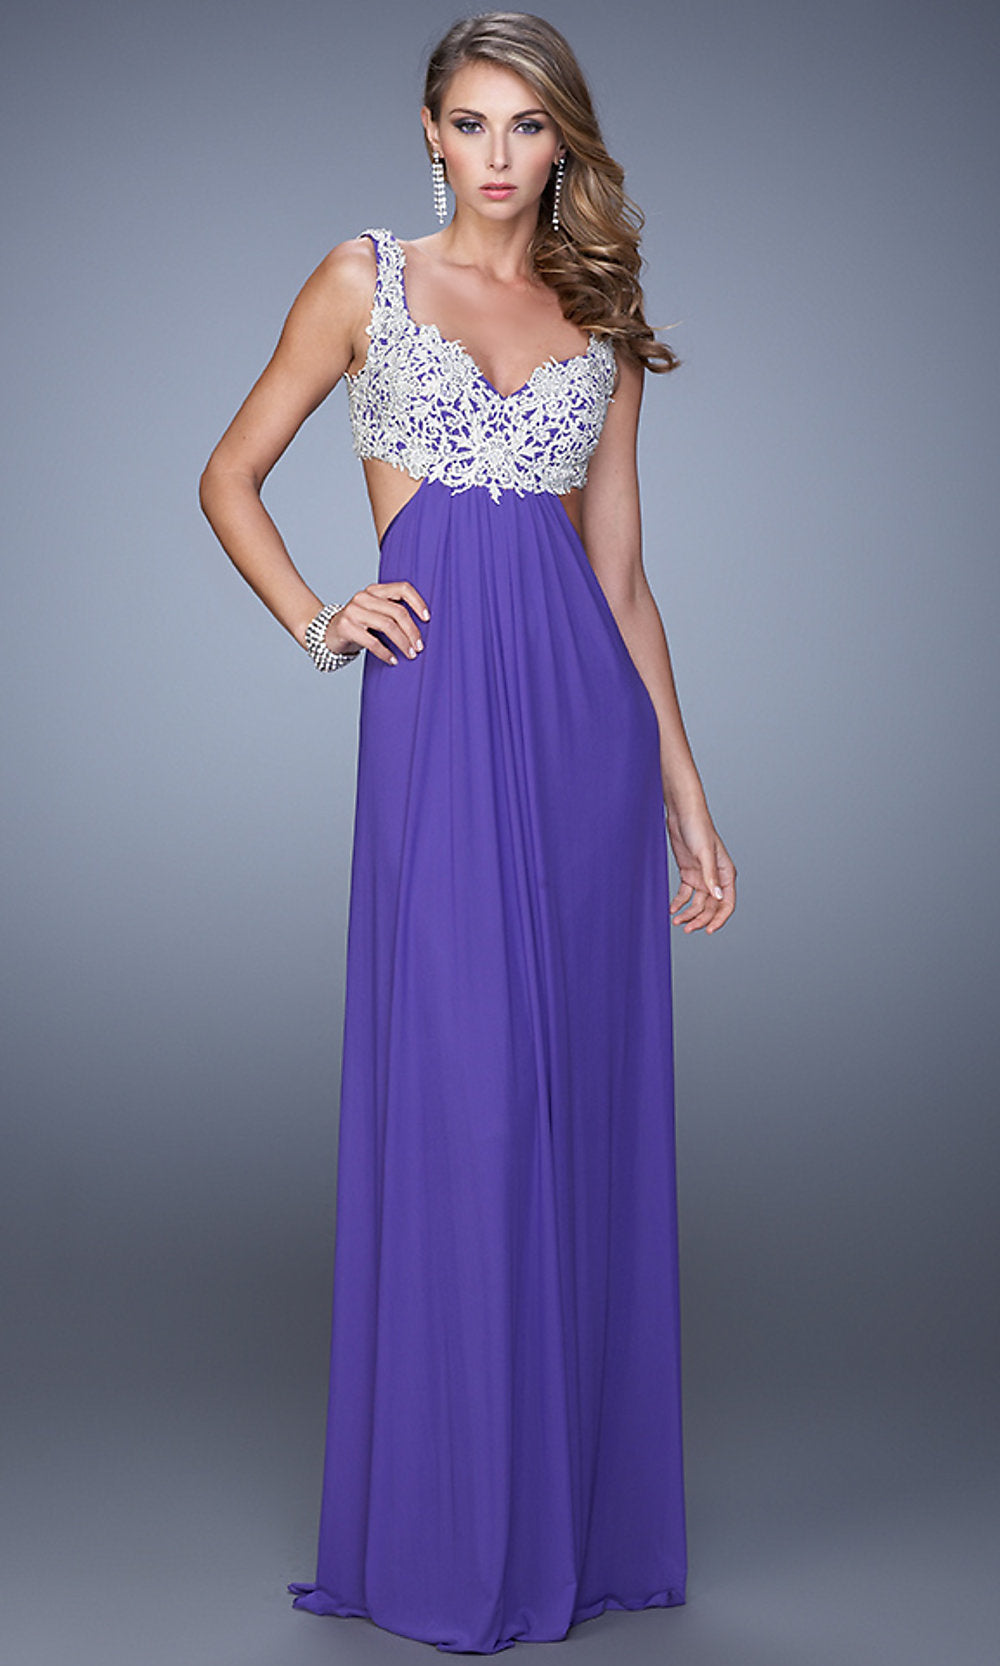 Long La Femme Prom Dress with Cut-Out Sides